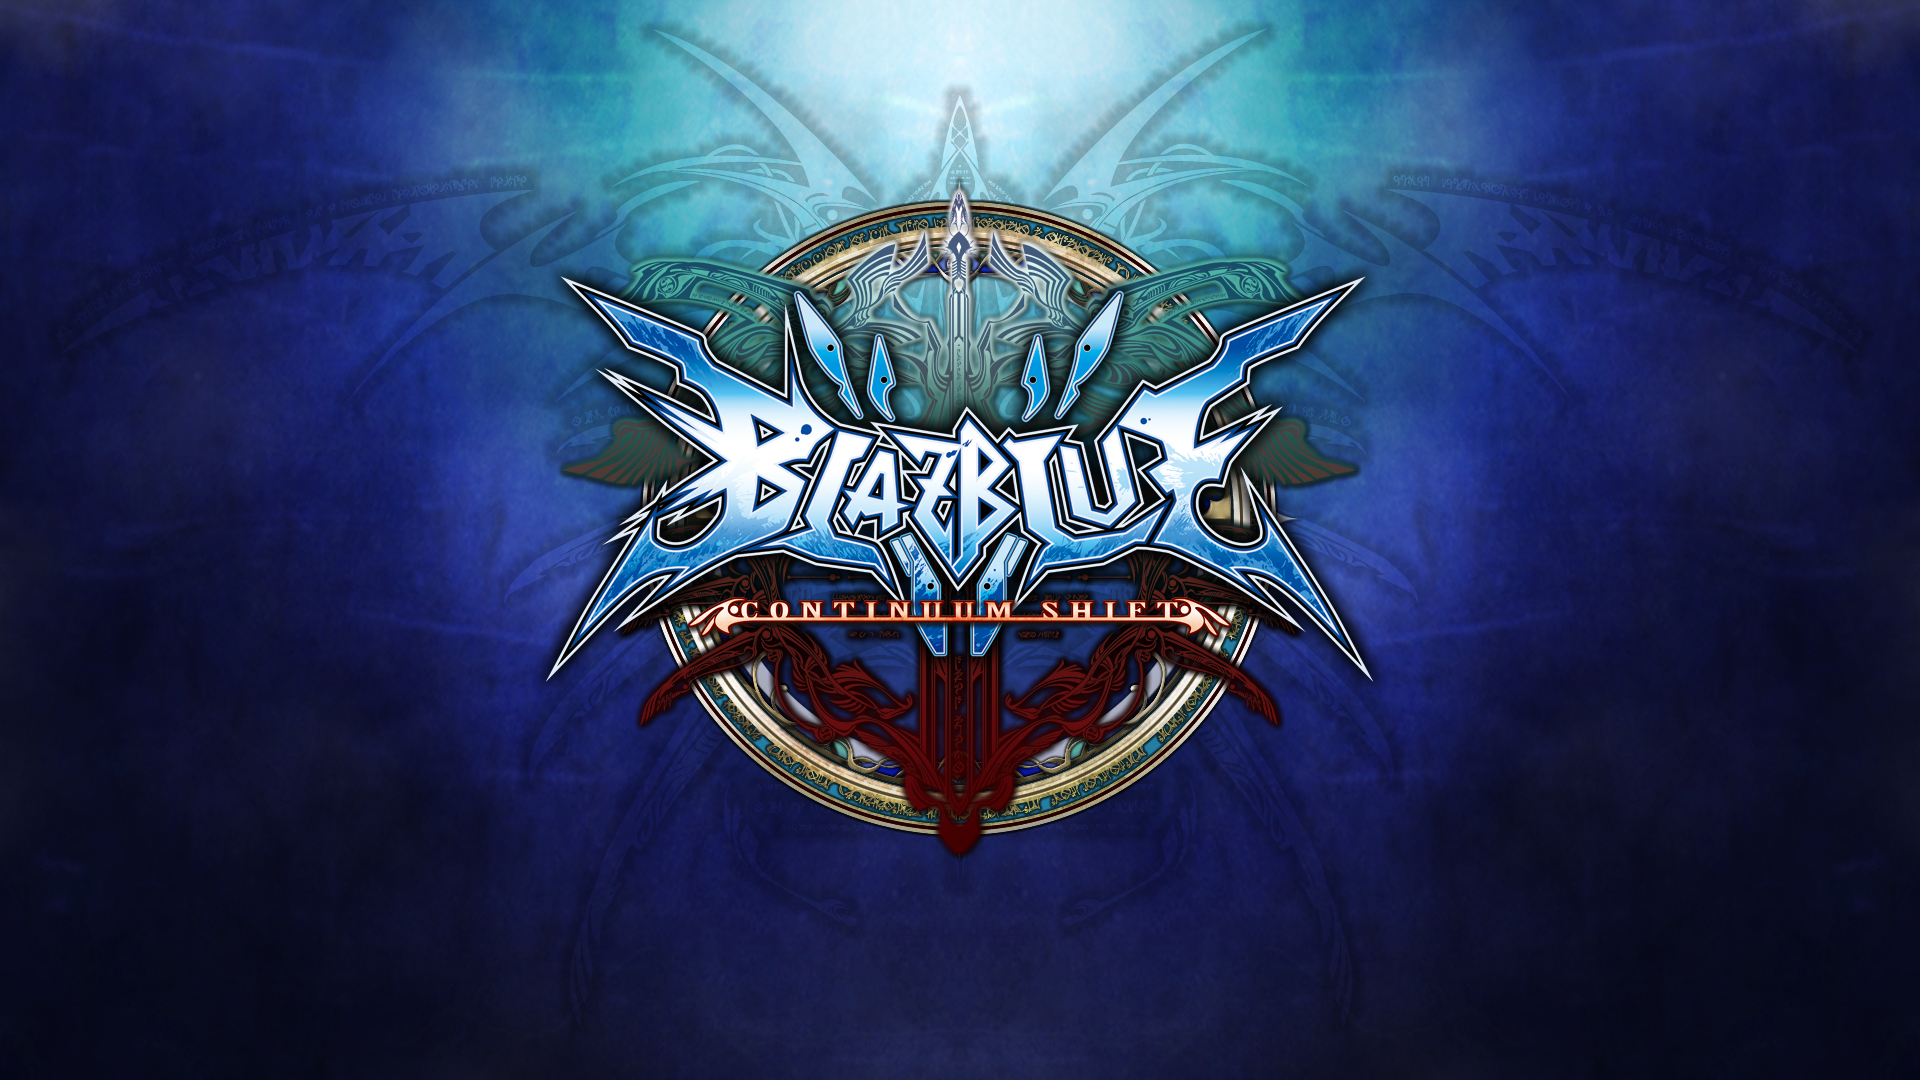 Video Game BlazBlue: Continuum Shift HD Wallpaper Background Image.